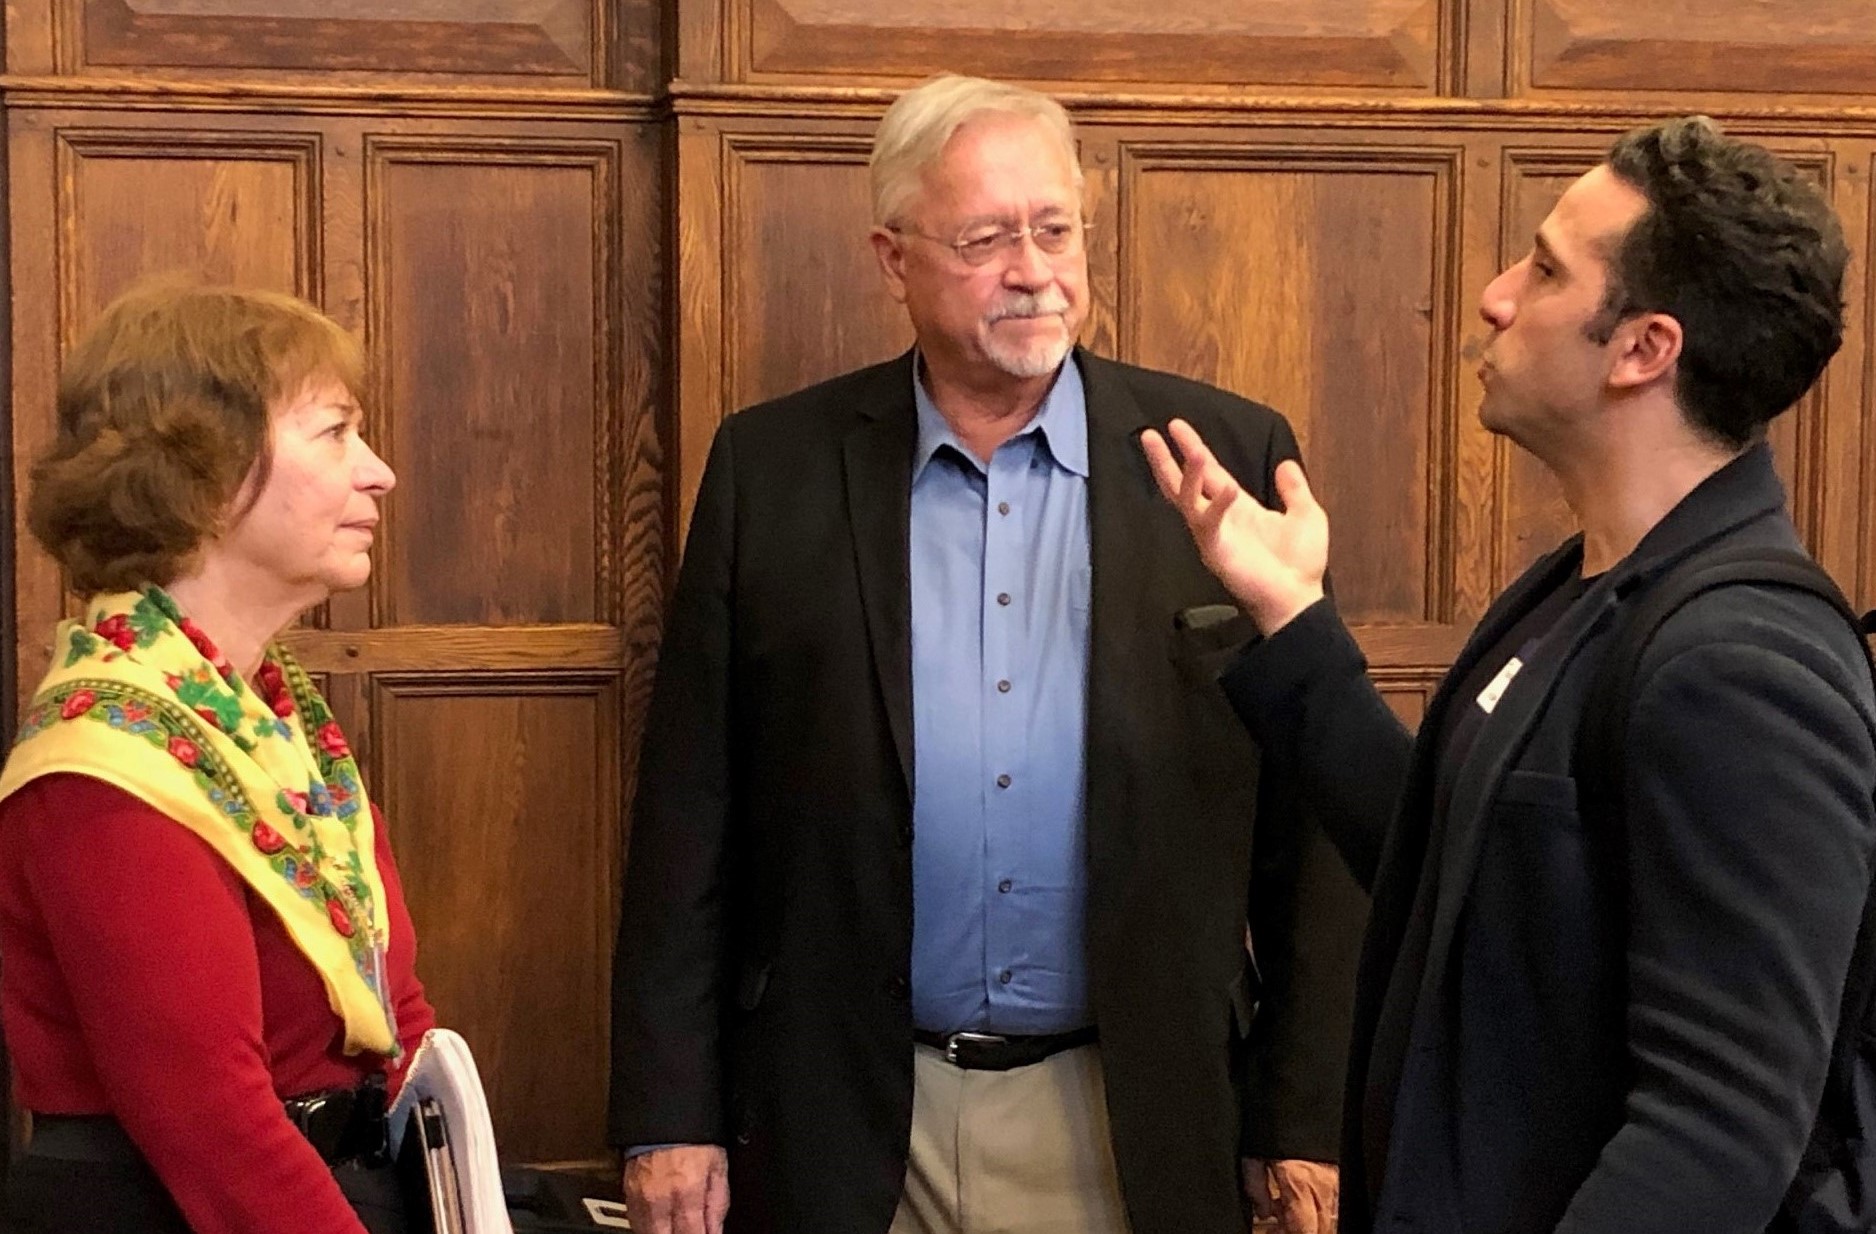 L to R: Melanie Norton, co-chair of DiversAbility at Yale, Jim Conroy ’70, and Thomas Dolan ’05 of the YAA Board of Governors chat after the panel. Photo: Henry Kwan